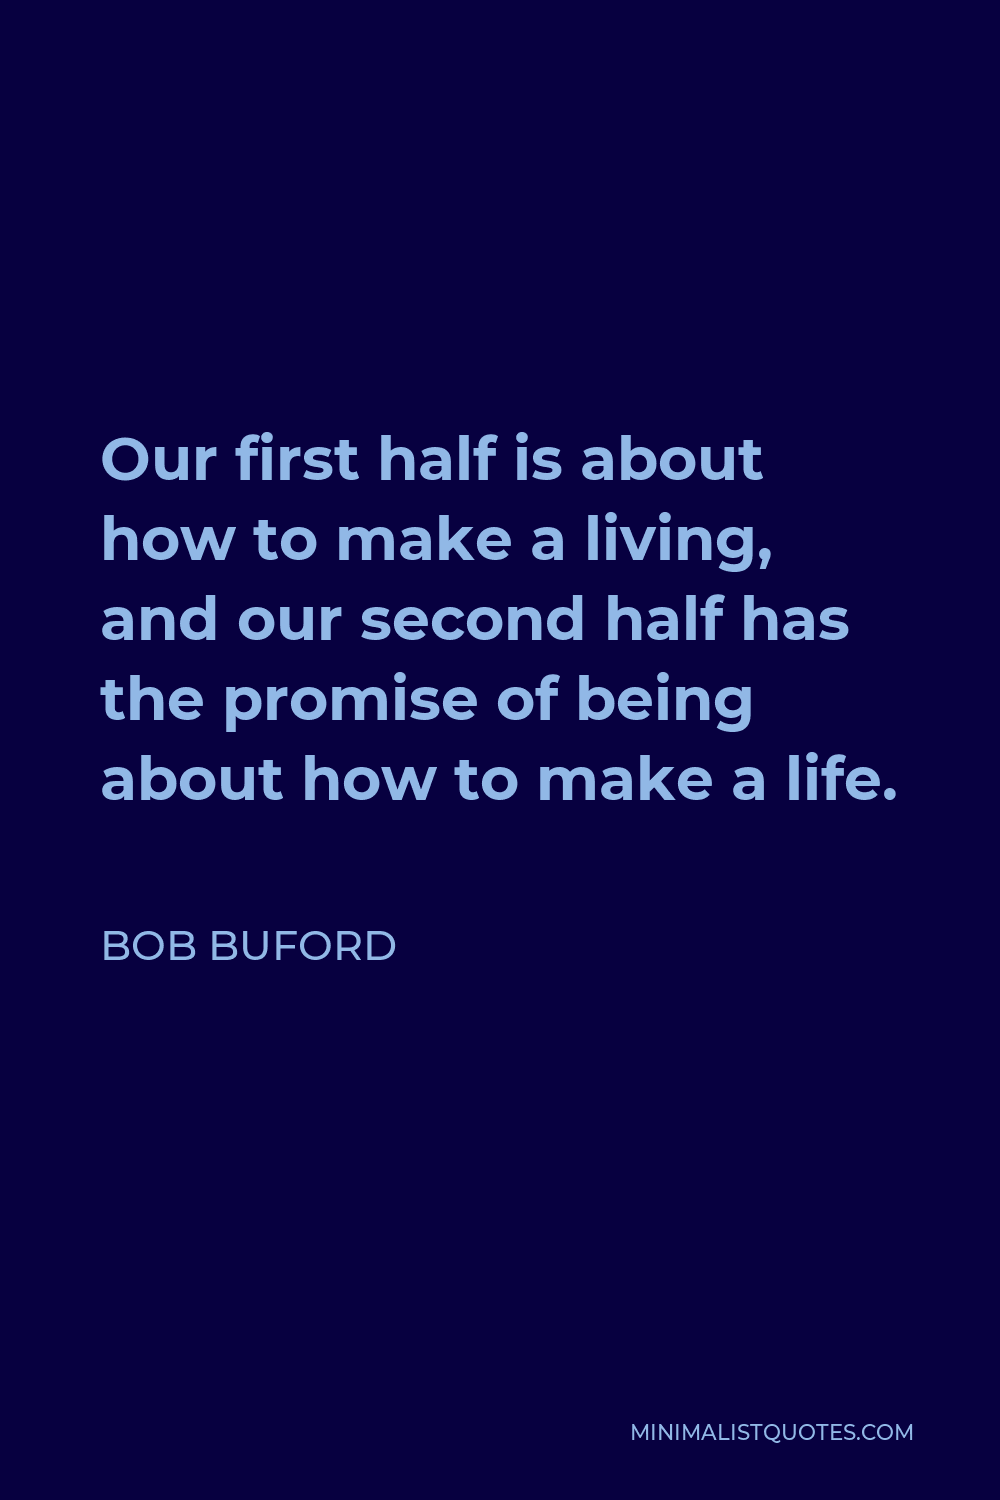 Bob Buford Quote - Our first half is about how to make a living, and our second half has the promise of being about how to make a life.